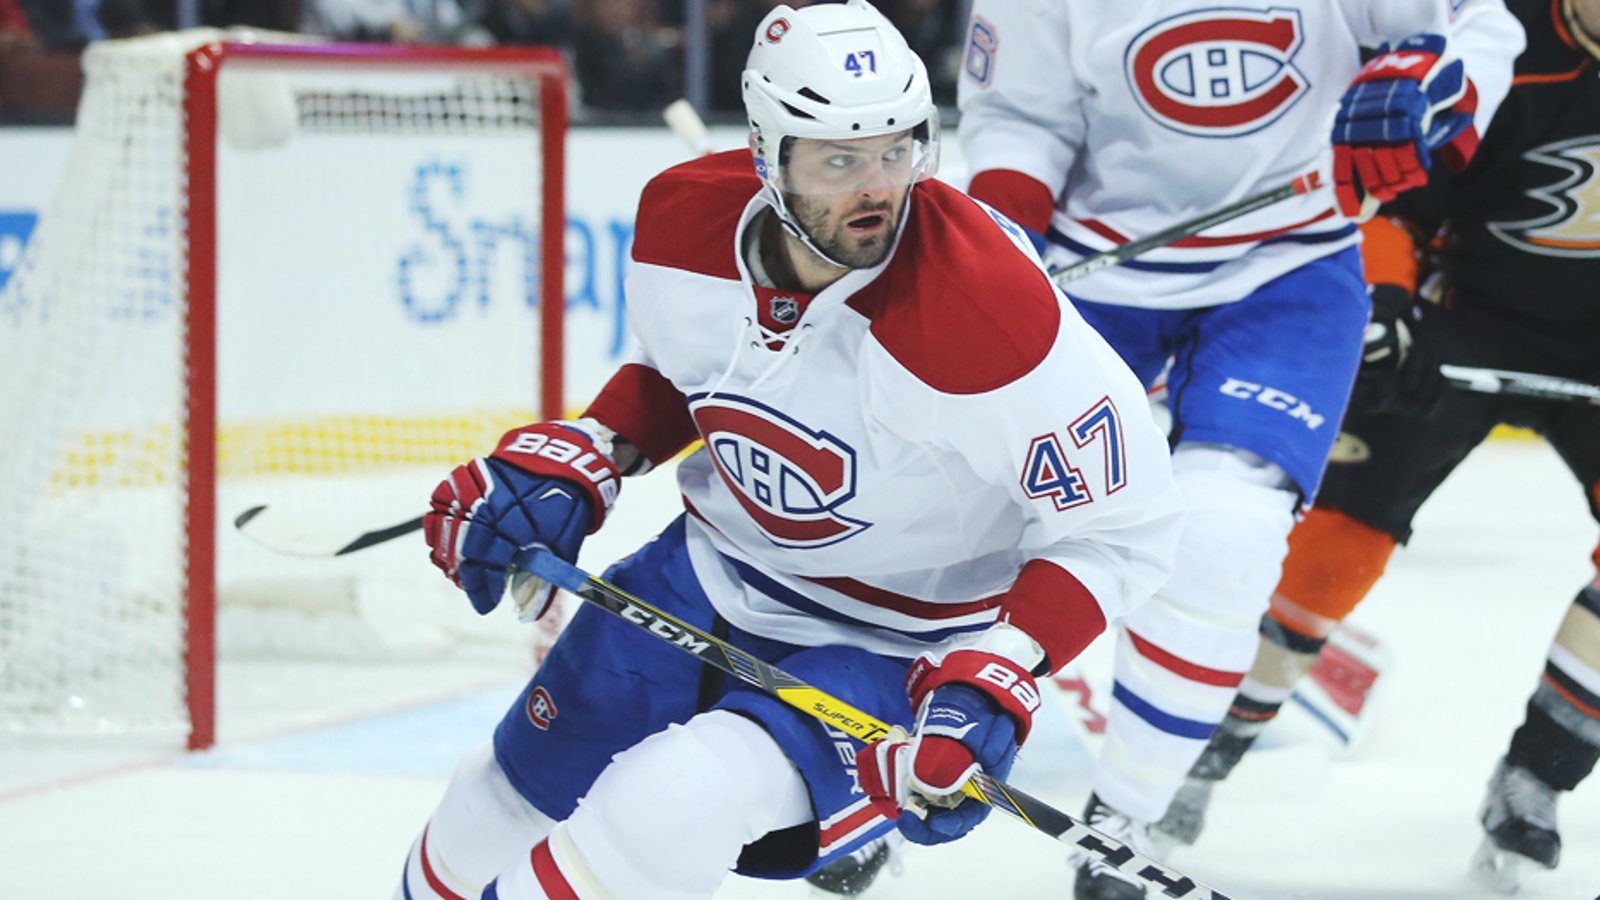 Breaking: Canadian superstar player reportedly called Radulov to help sell the Stars.